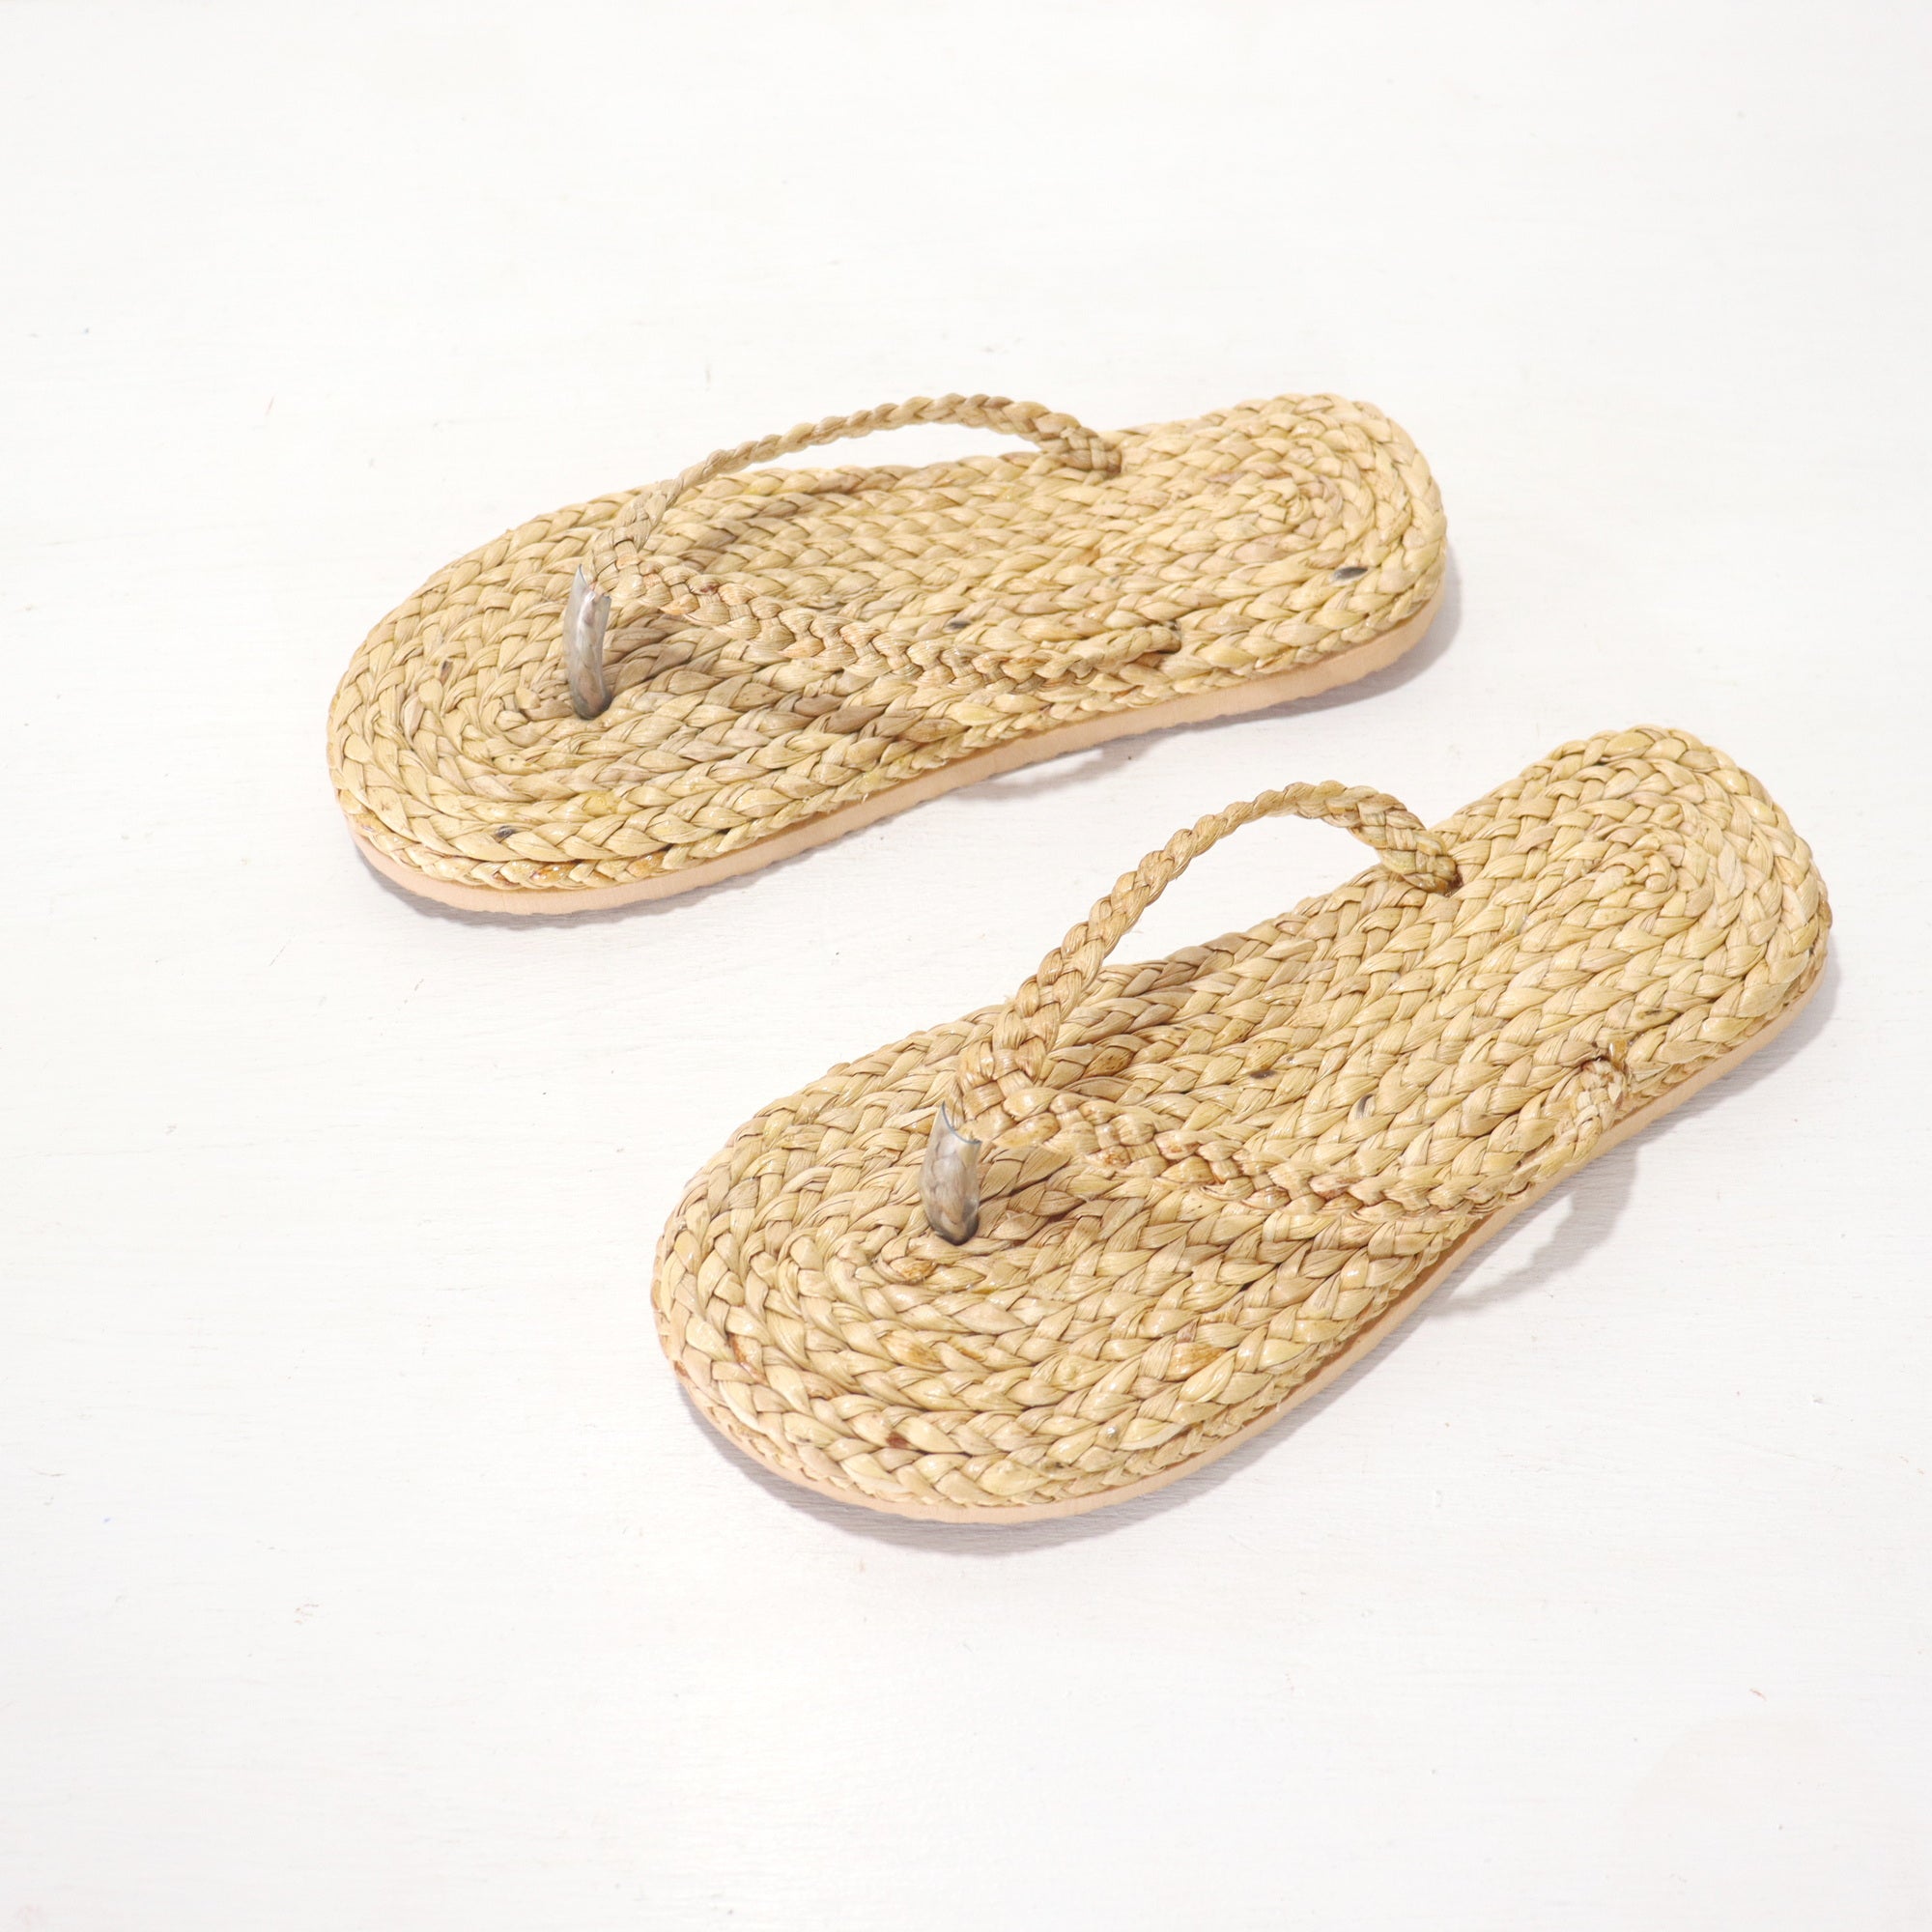 PU NI PA - Straw Shoe Sustainable Style for Every Step